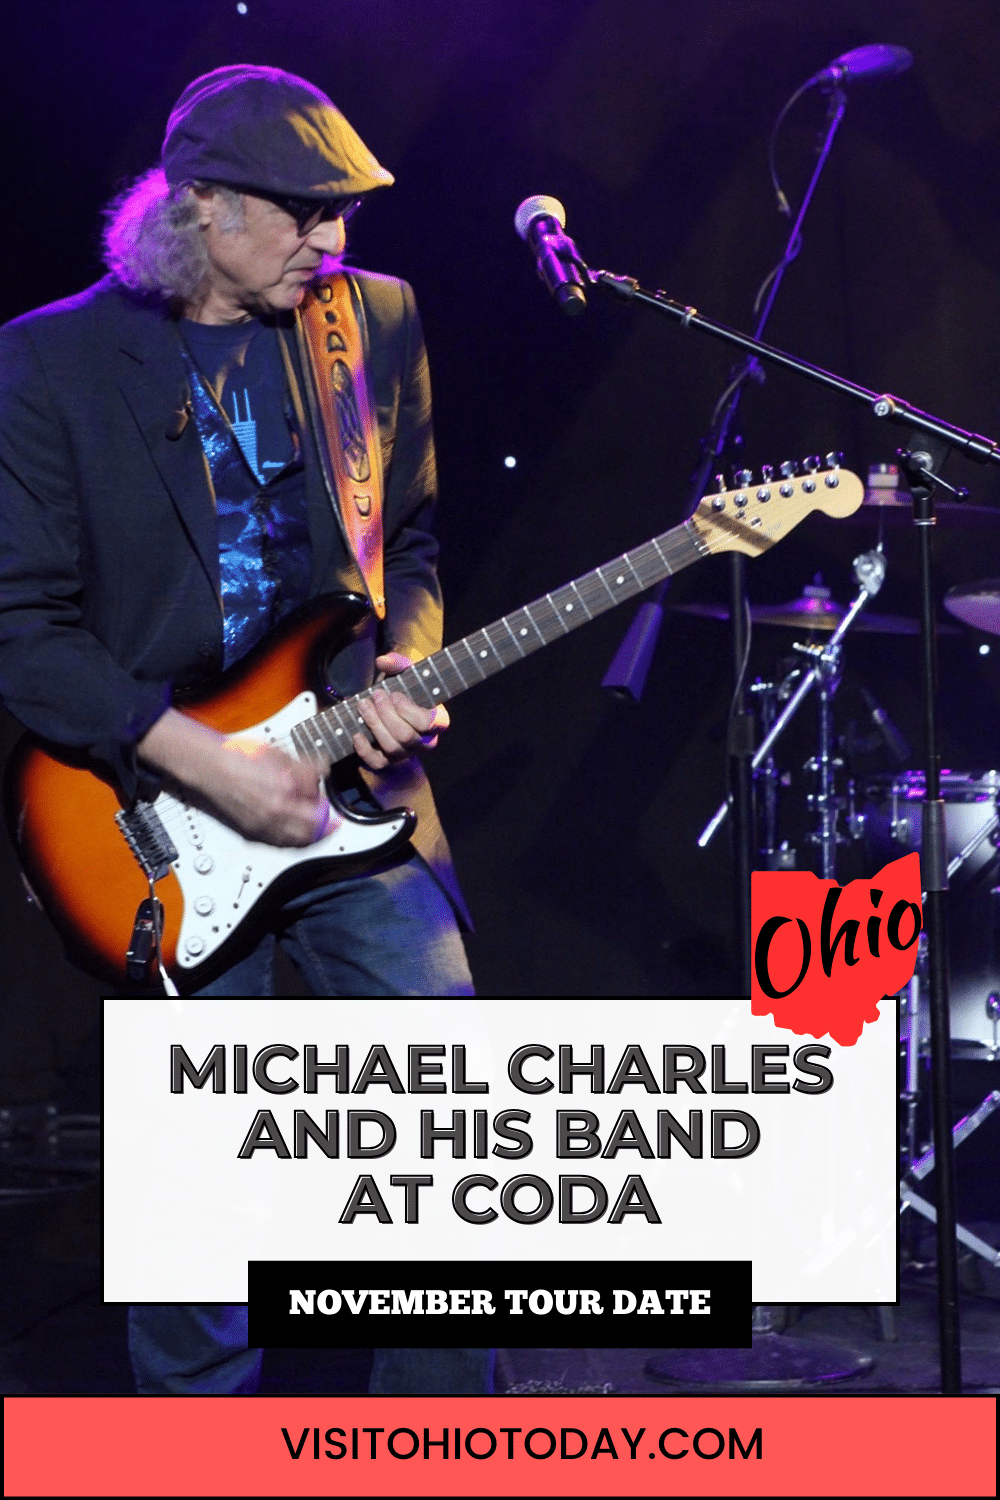 Chicago Blues Hall of Famer Michael Charles and His Band are appearing at CODA, Cleveland on Thursday November 9, 2023, as part of his ‘No Detours 2023’ tour.